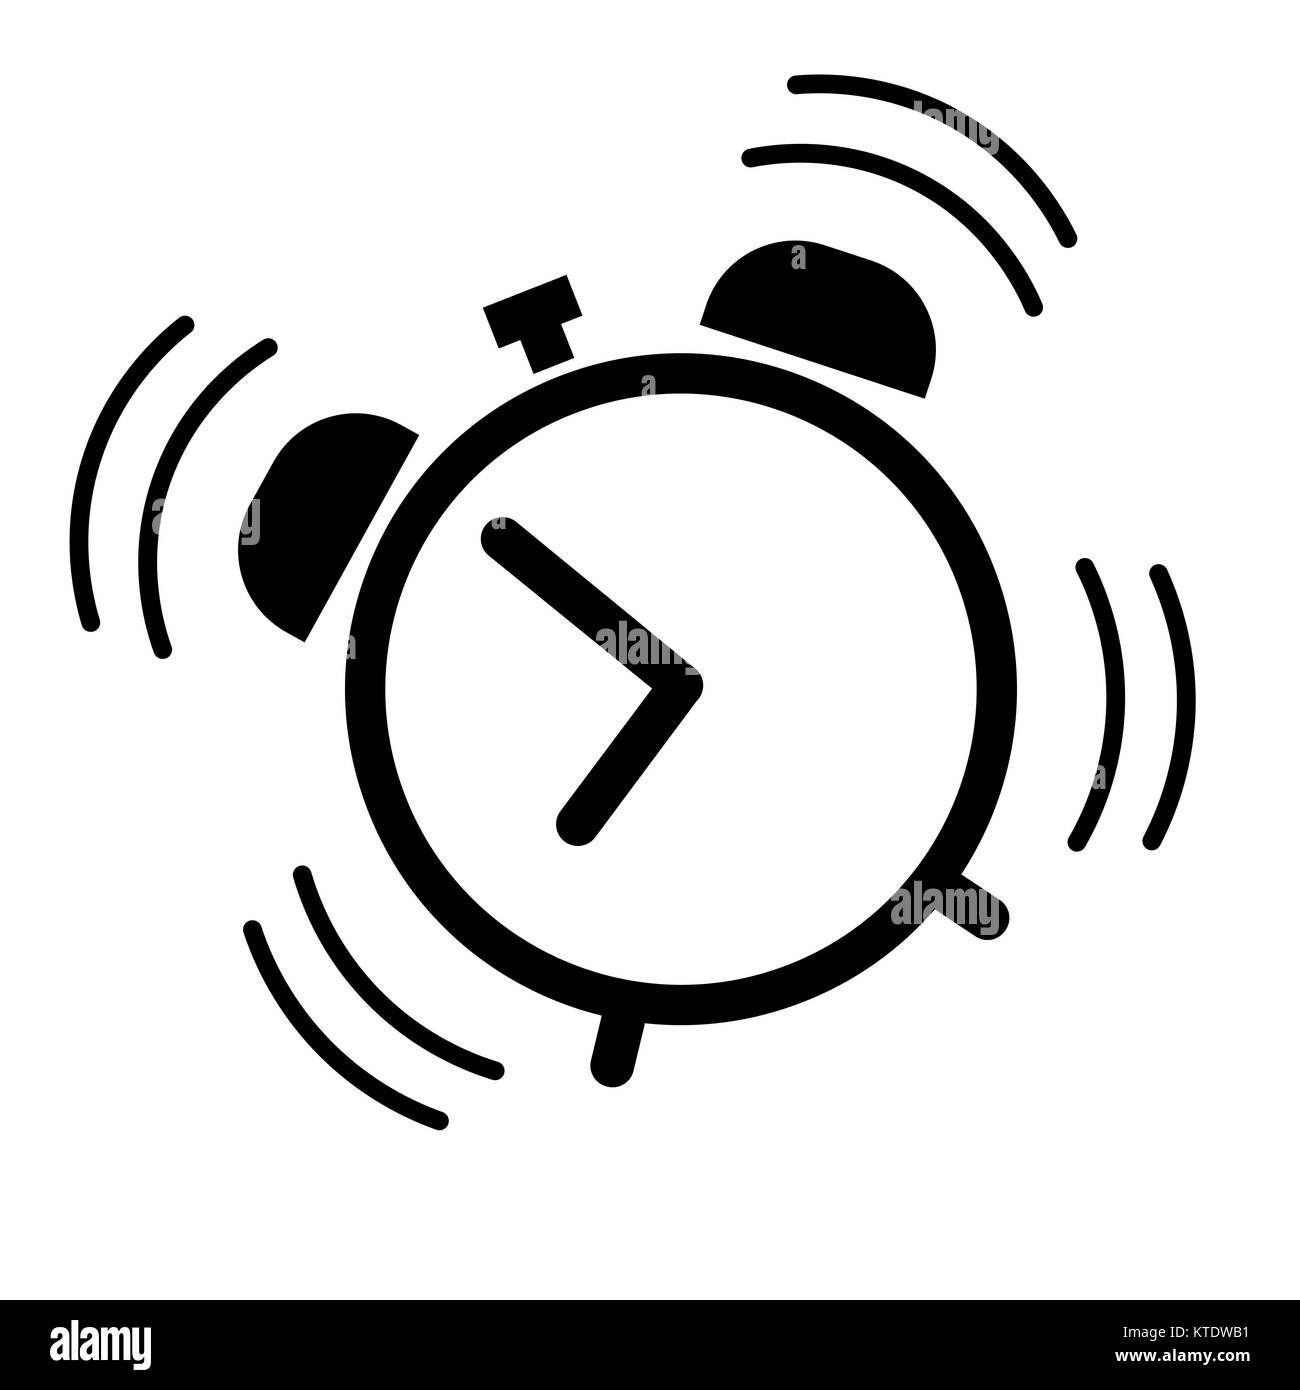 Alarm Clock Ringing Icon Over White Background Vector Illustration Royalty  Free SVG, Cliparts, Vectors, and Stock Illustration. Image 90690926.